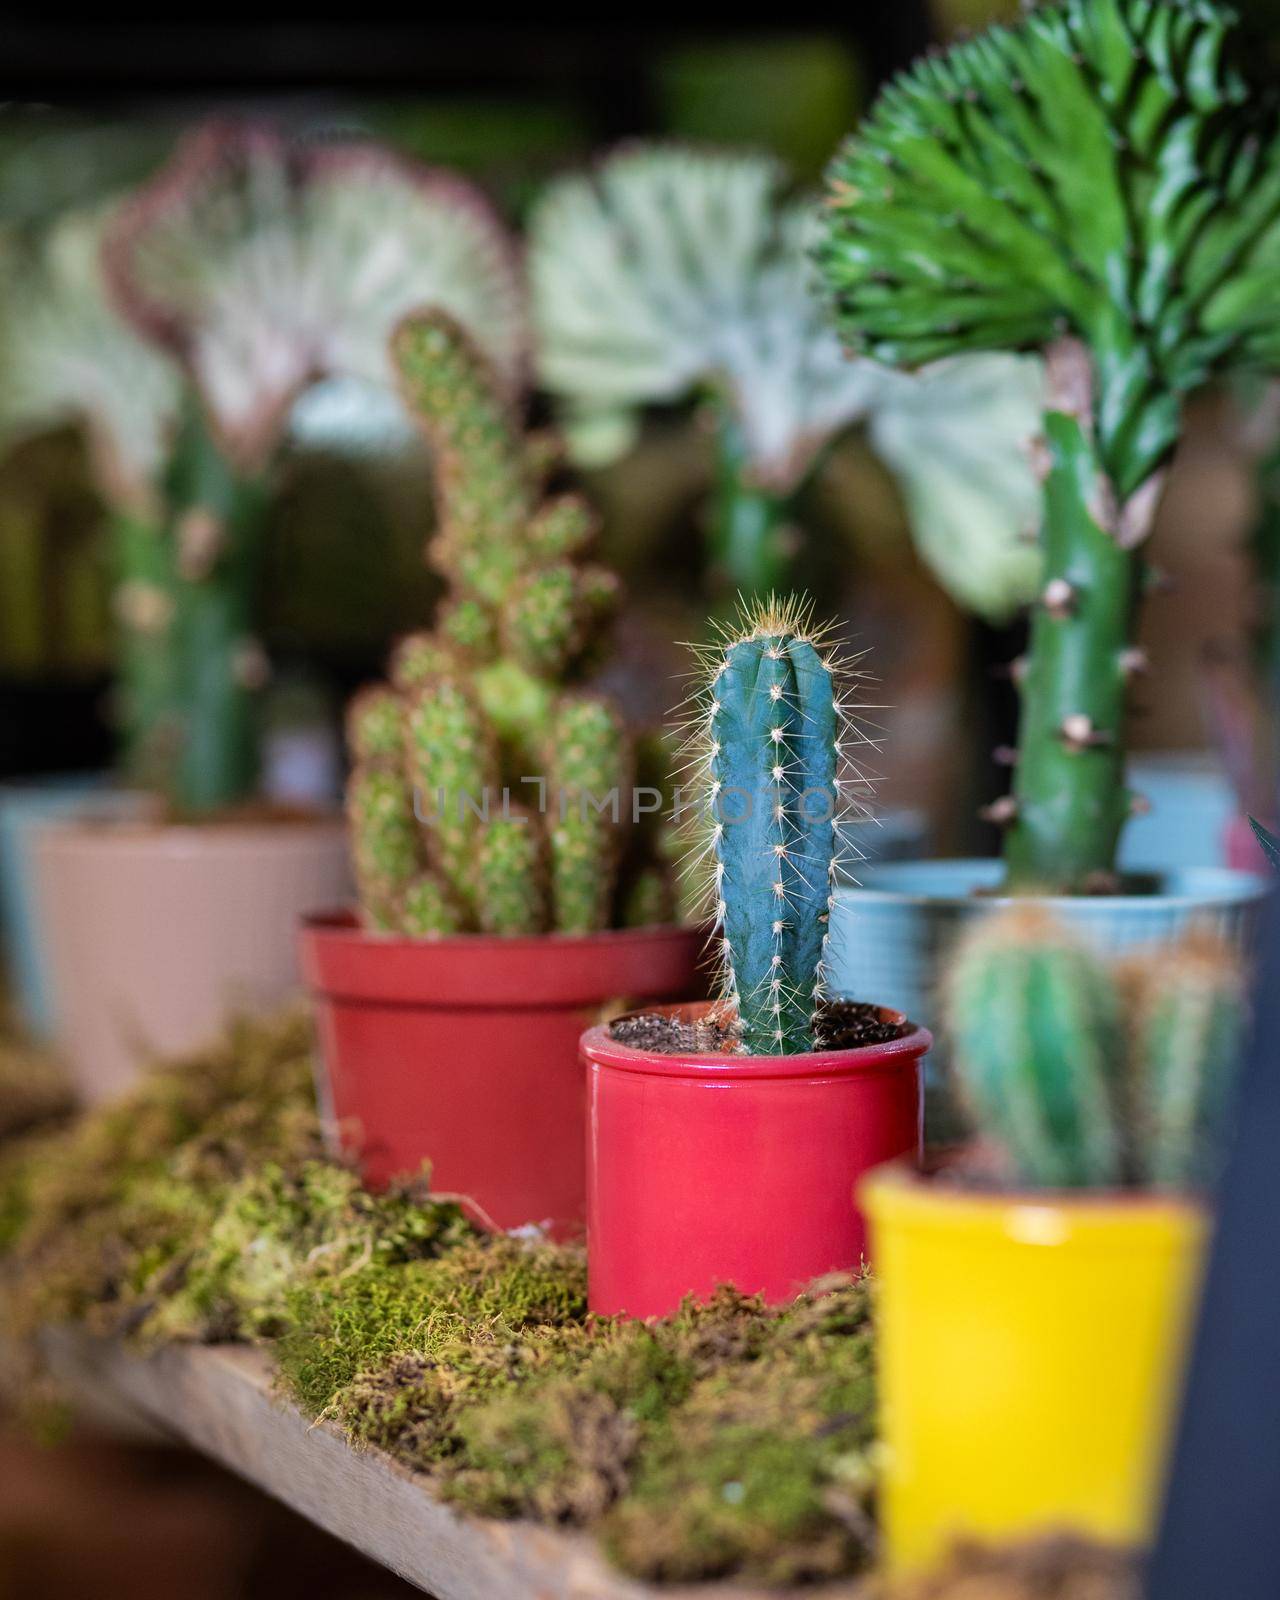 A lot of small cactuses in different colored pots. Cereus, Gymnocalycium by ferhad